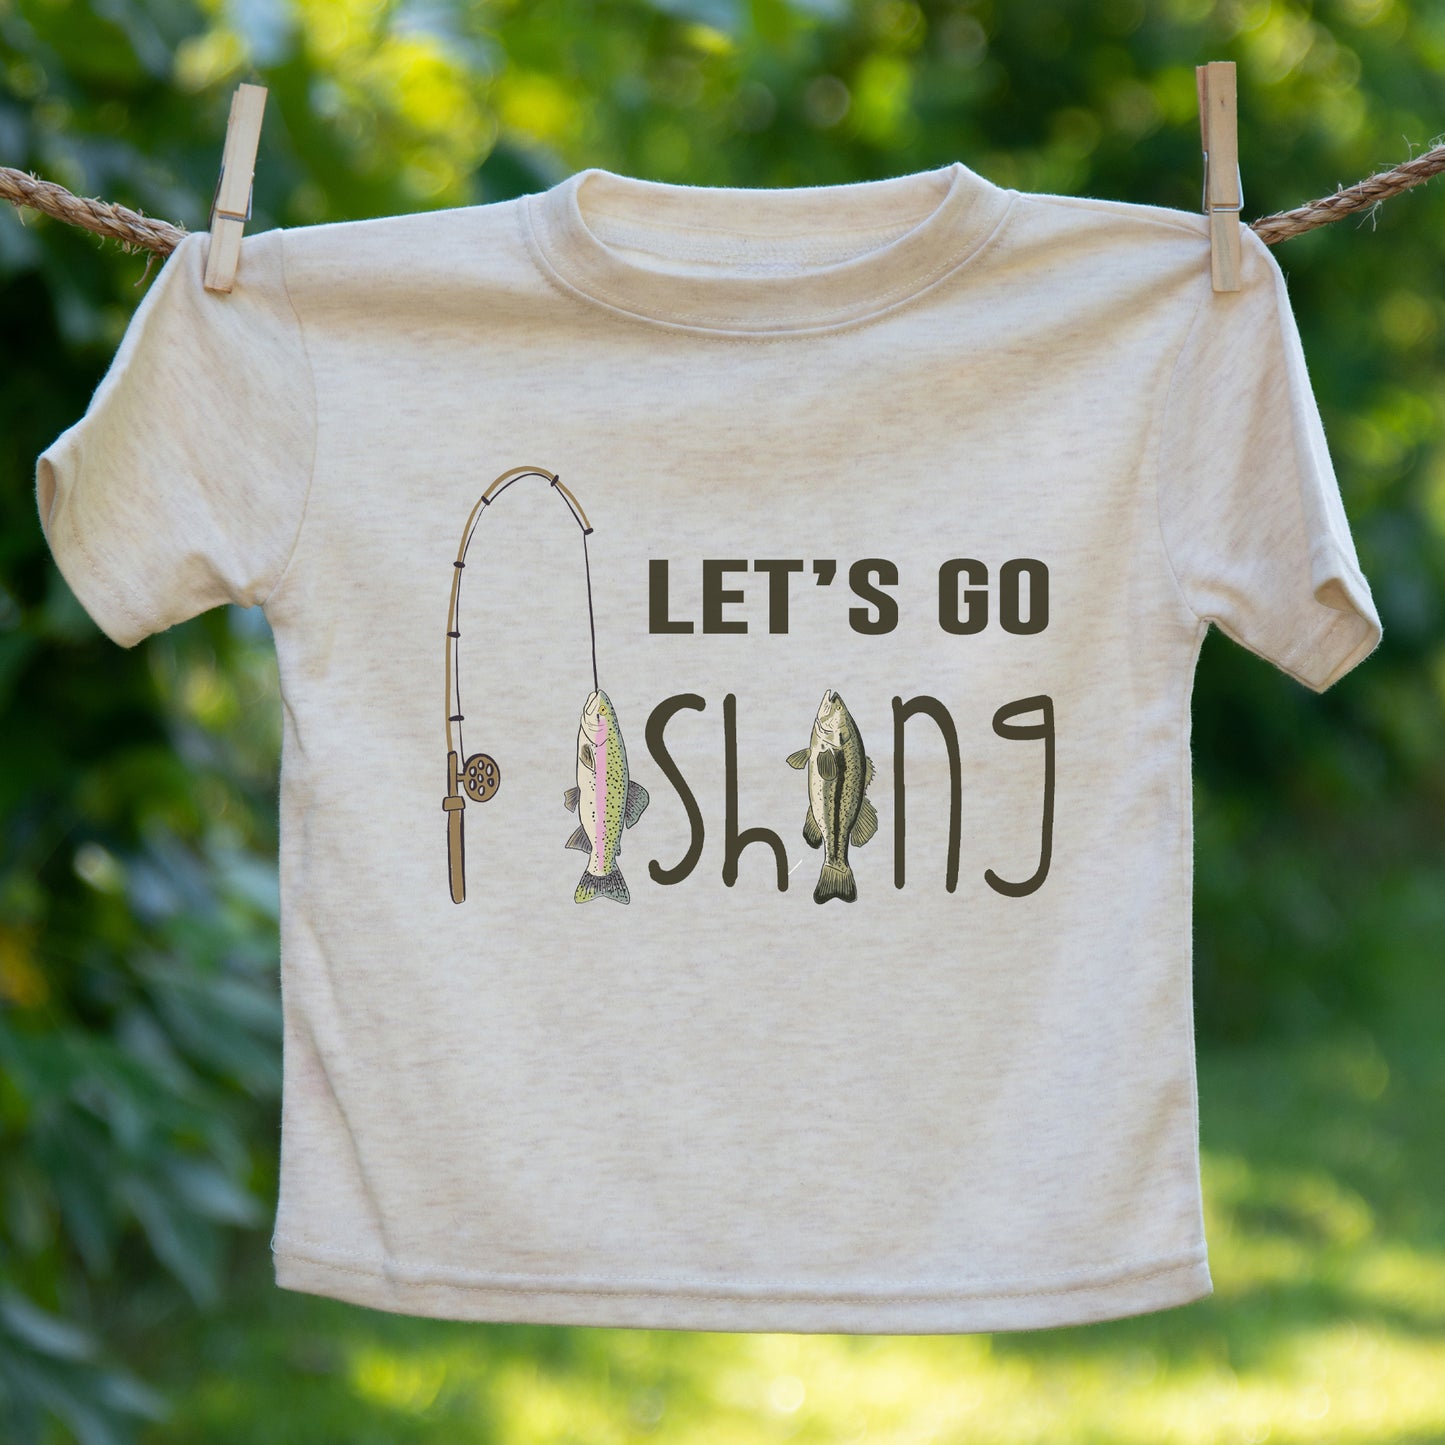 Let's Go Fishing Toddler/Youth Summer Shirt | Barefoot Baby Youth XS (4-6)